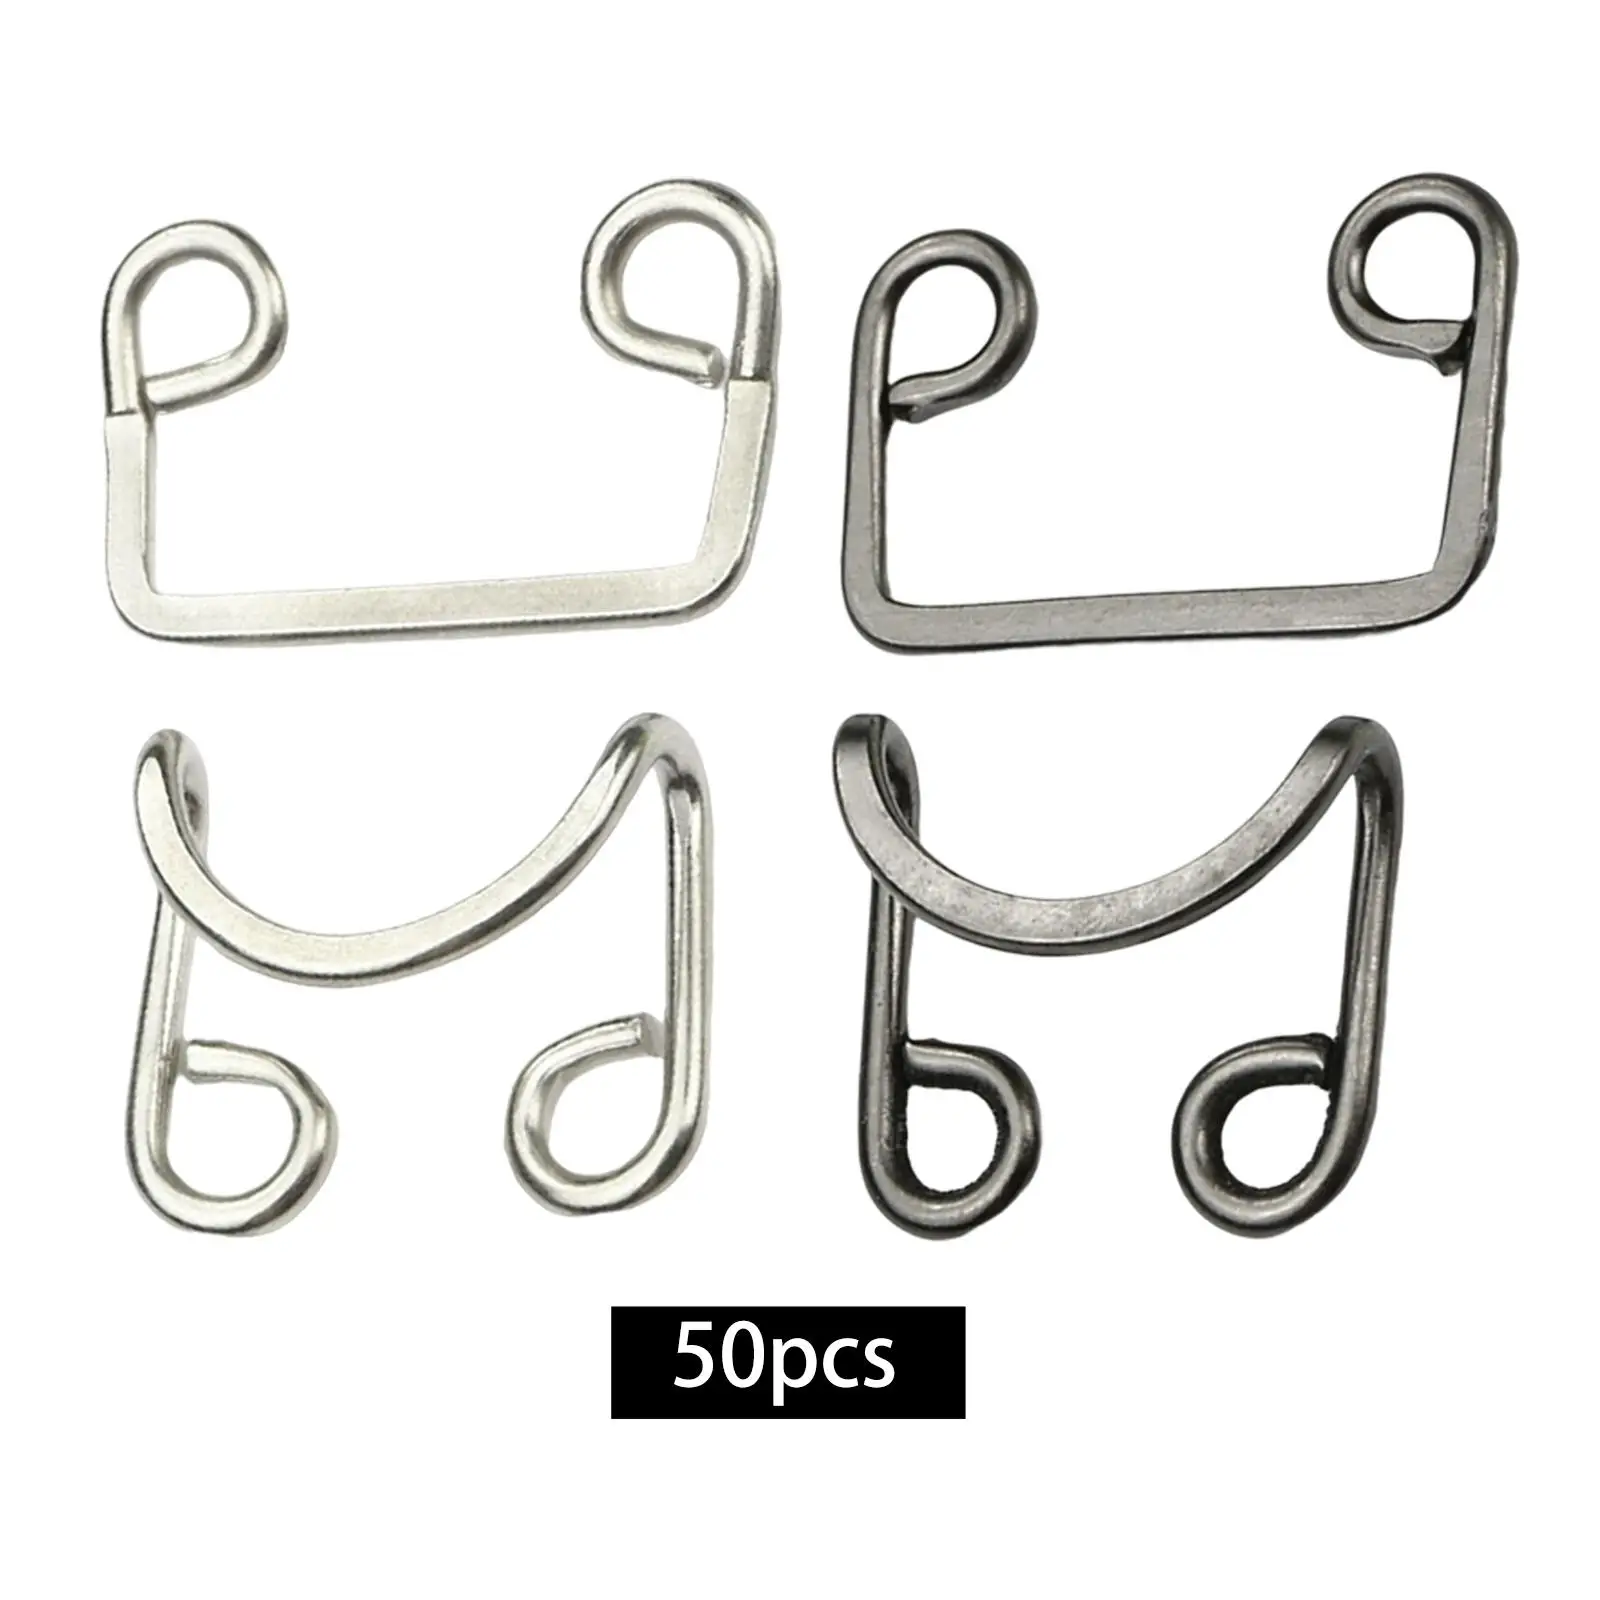 50 Pairs Metal Buckle Waist Fittings Adjustable Sewing Hook Button Collar Clasp for Fabric Crafts Underwear Pants Extender Jeans